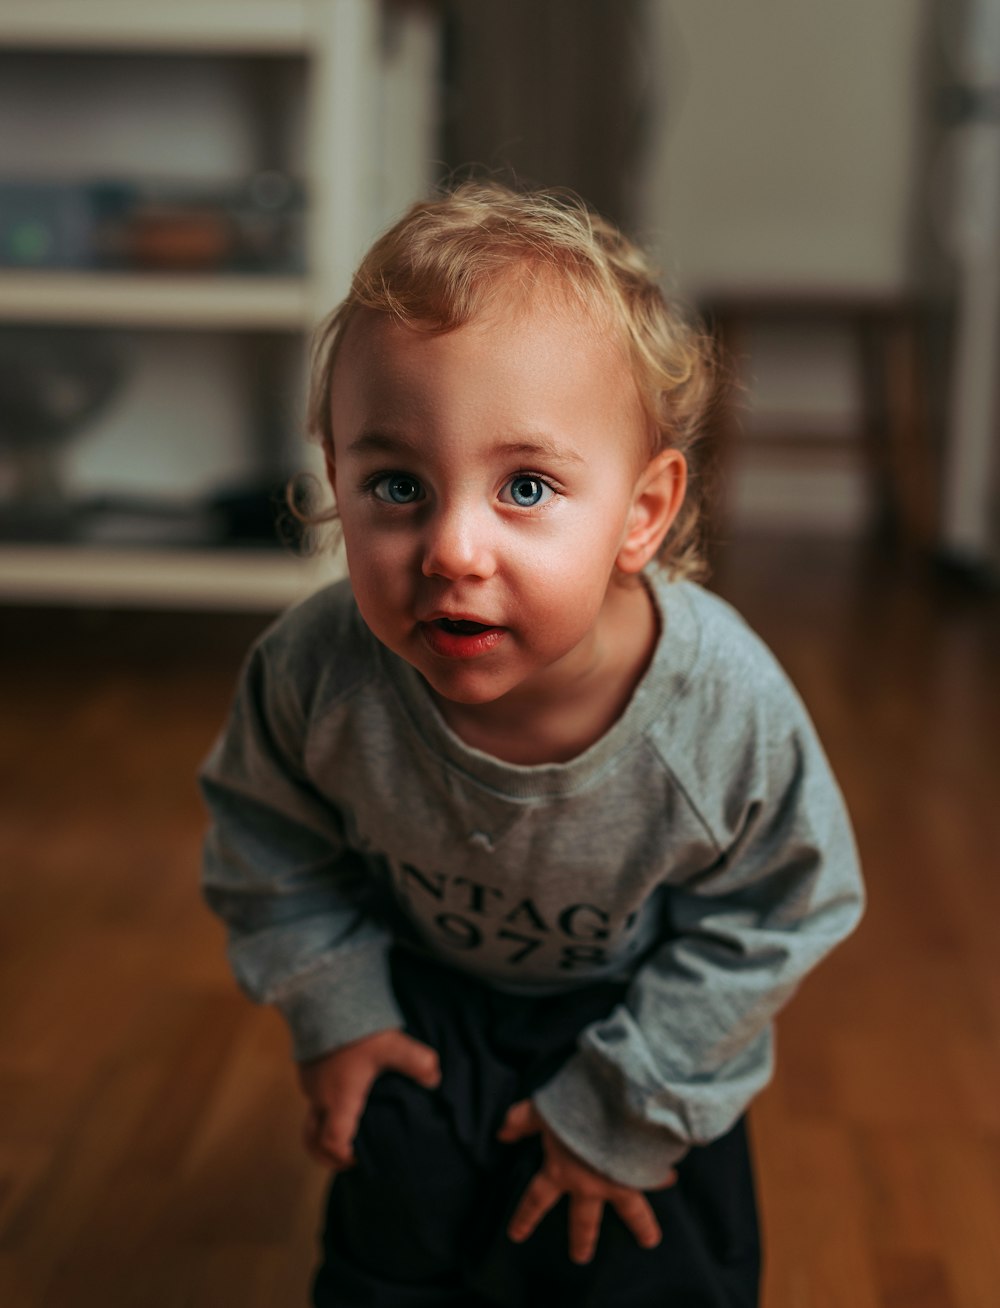 Small Child Pictures | Download Free Images on Unsplash